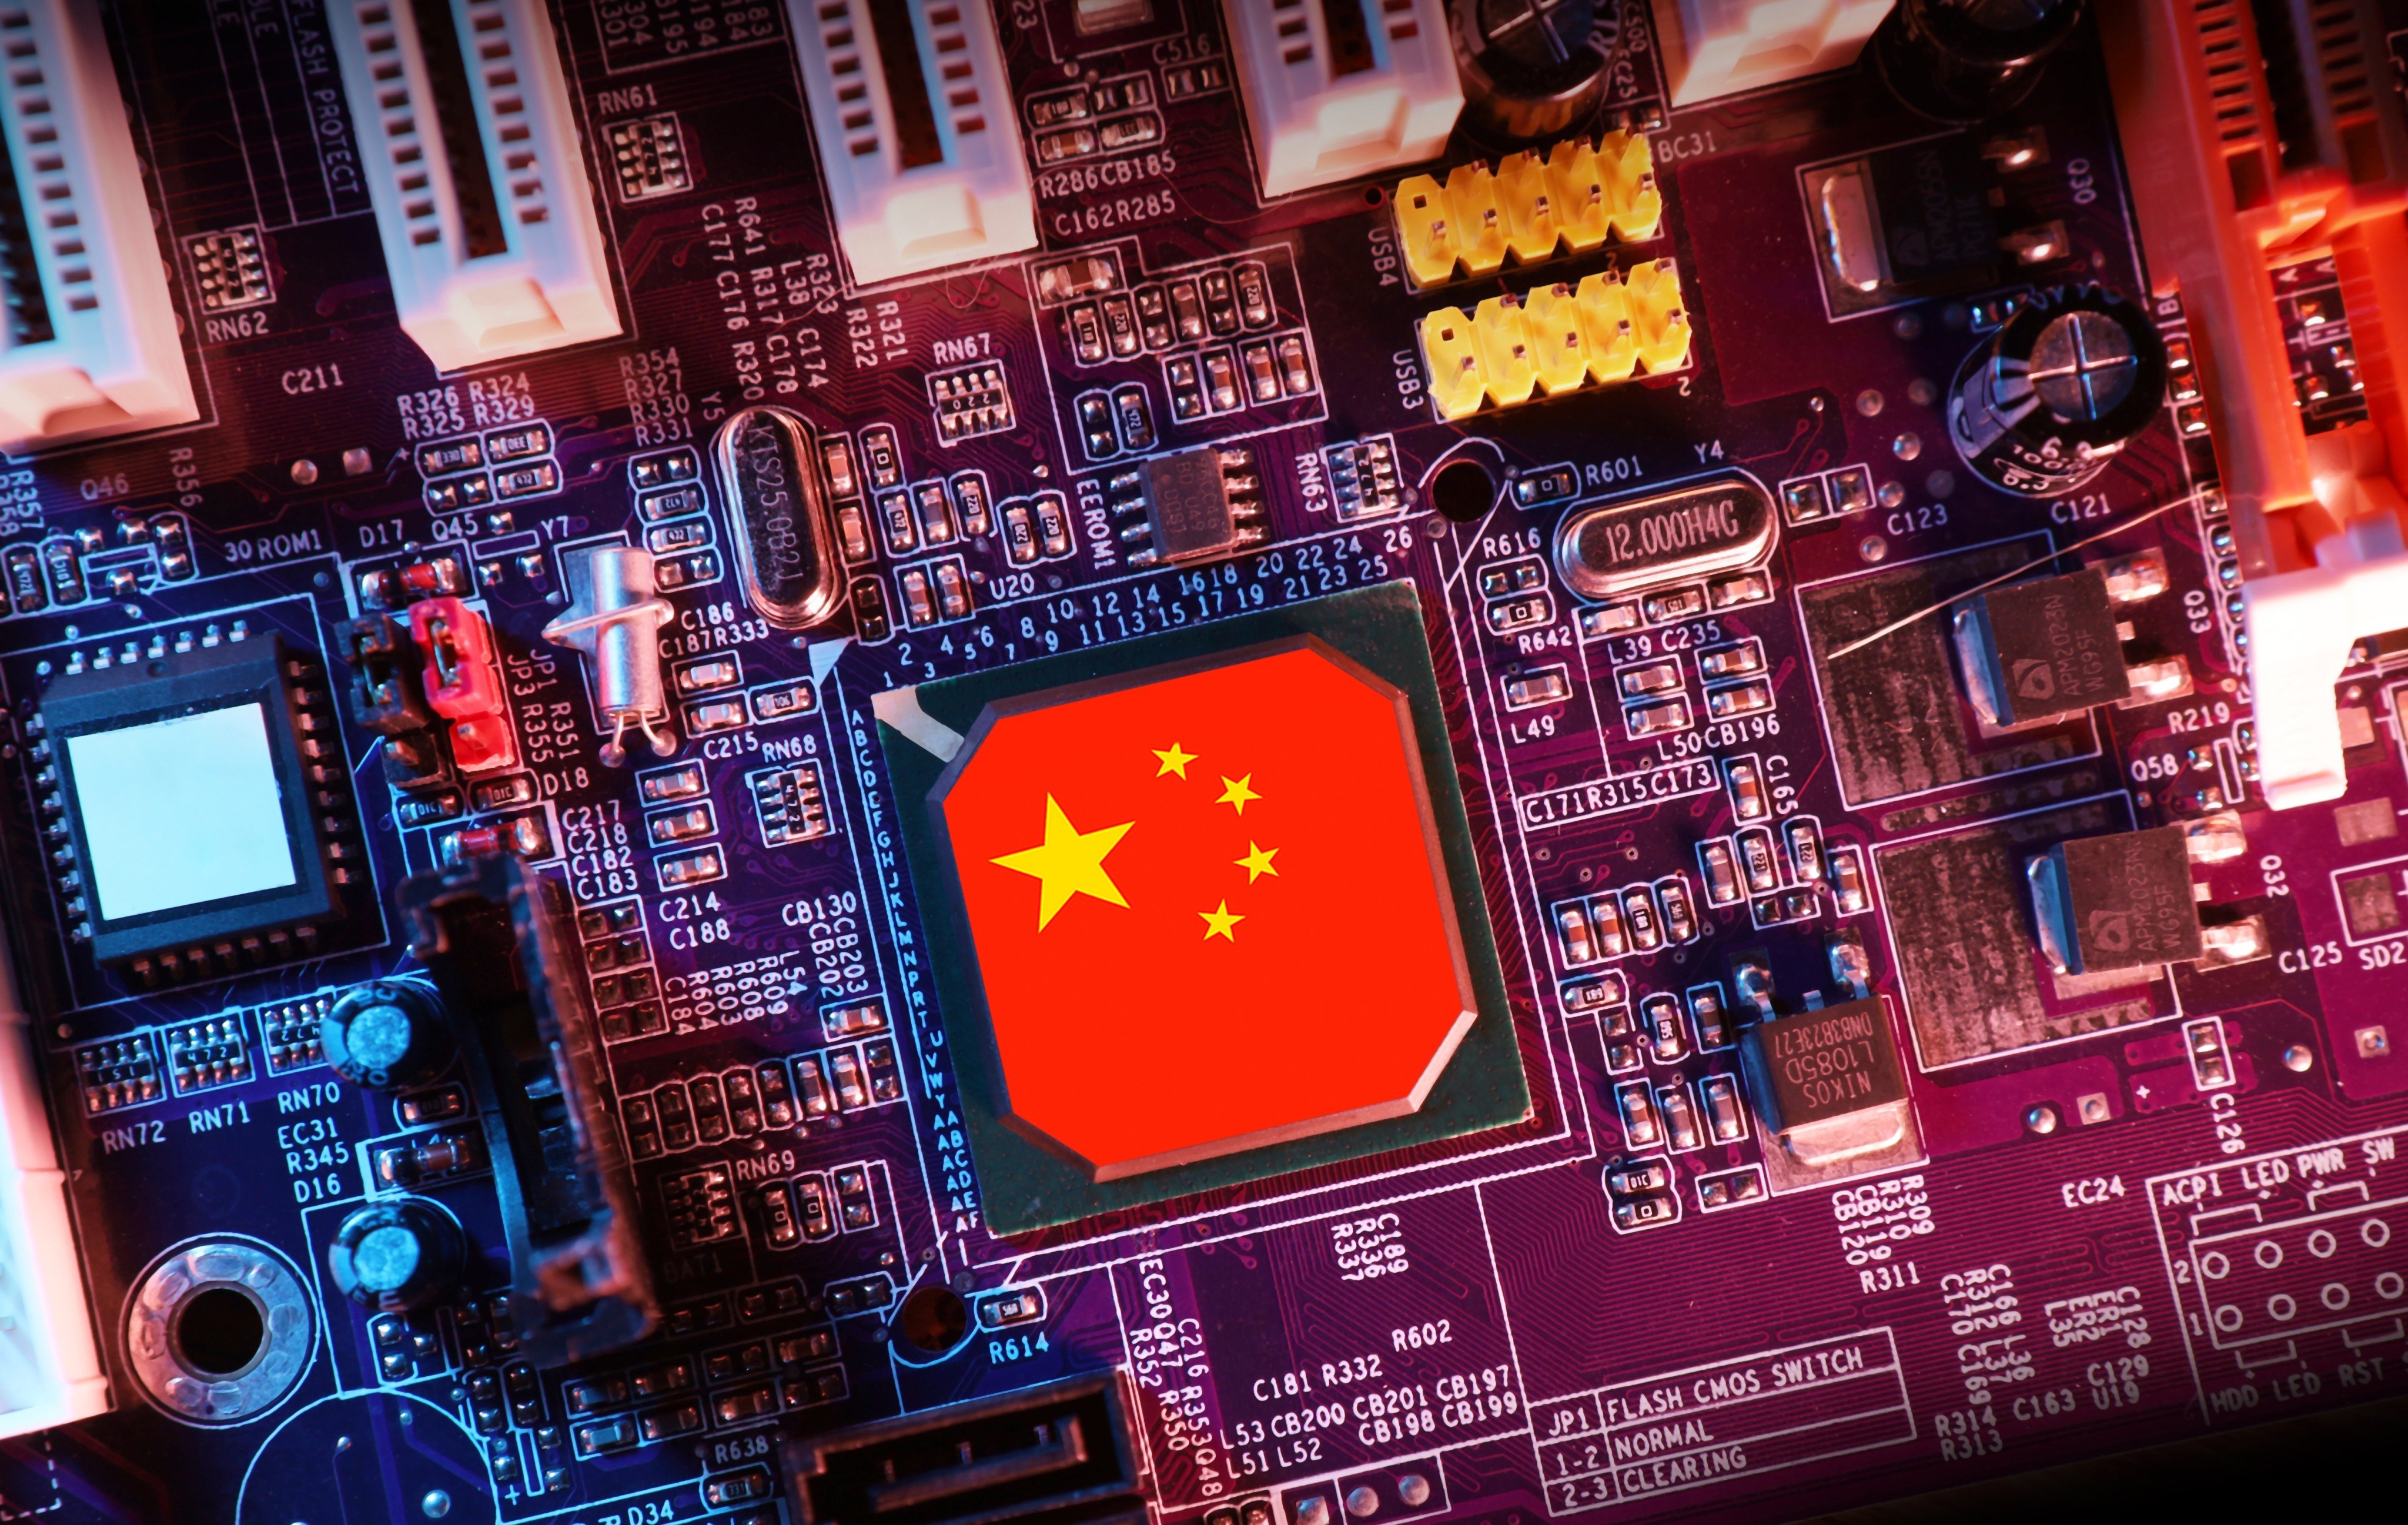 The high level of trust among Western and Japanese tech partners is based on common values in the “Western economic order”. China is tightly integrated into the world economy but some still see it as not quite inside this economic order. Photo: Shutterstock